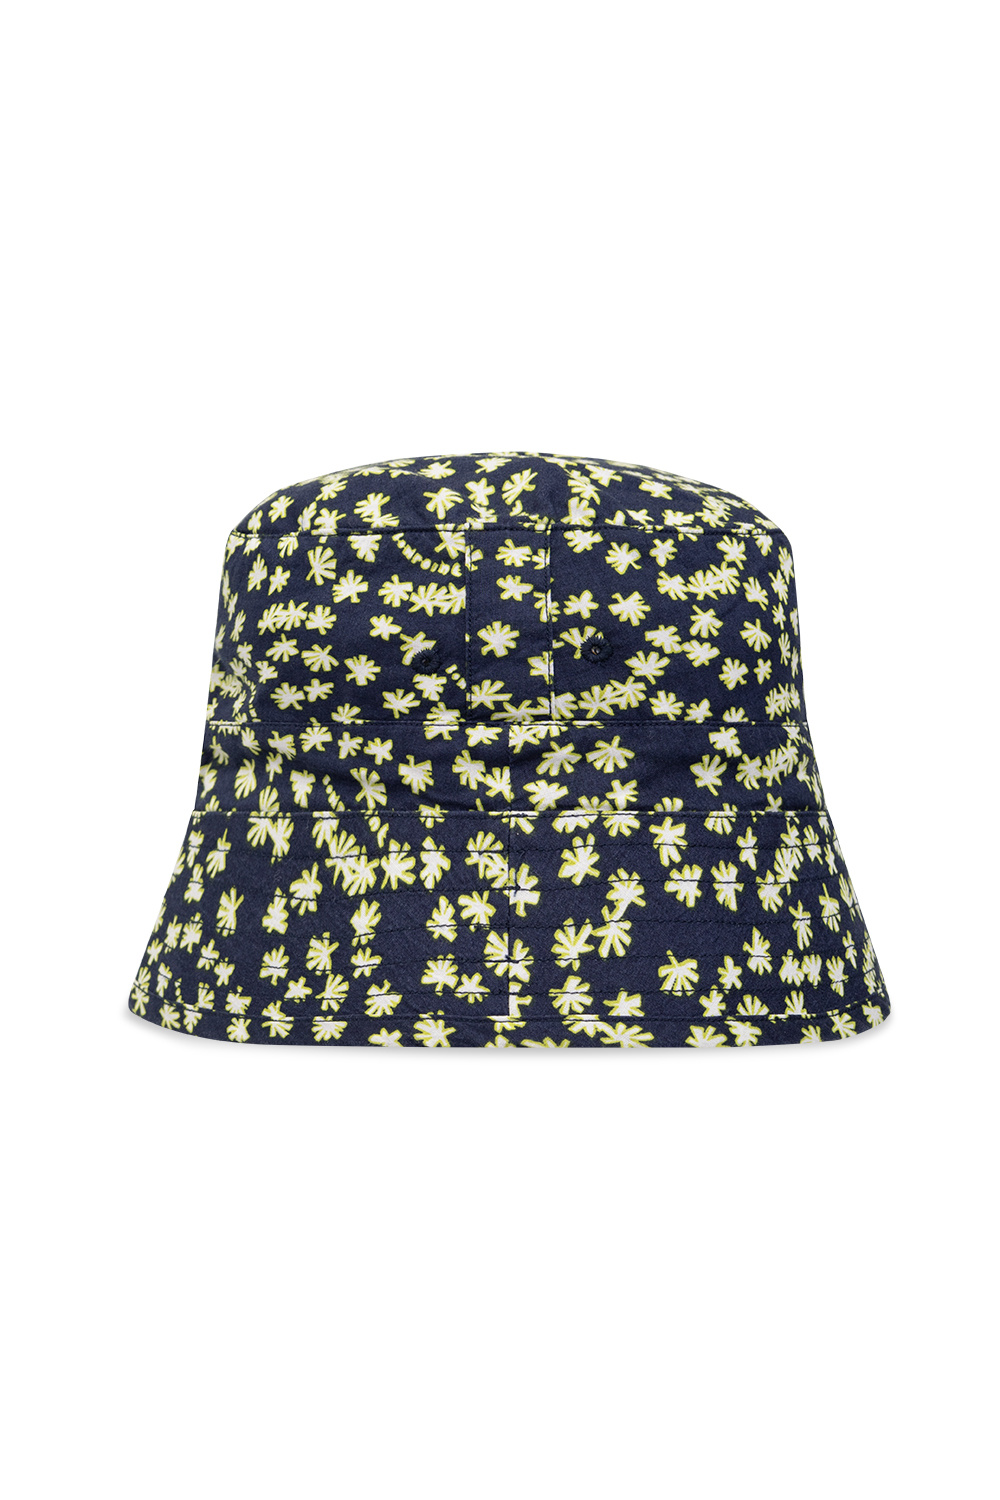 Bonpoint  Bucket hat with floral VN0A47S8BLK1